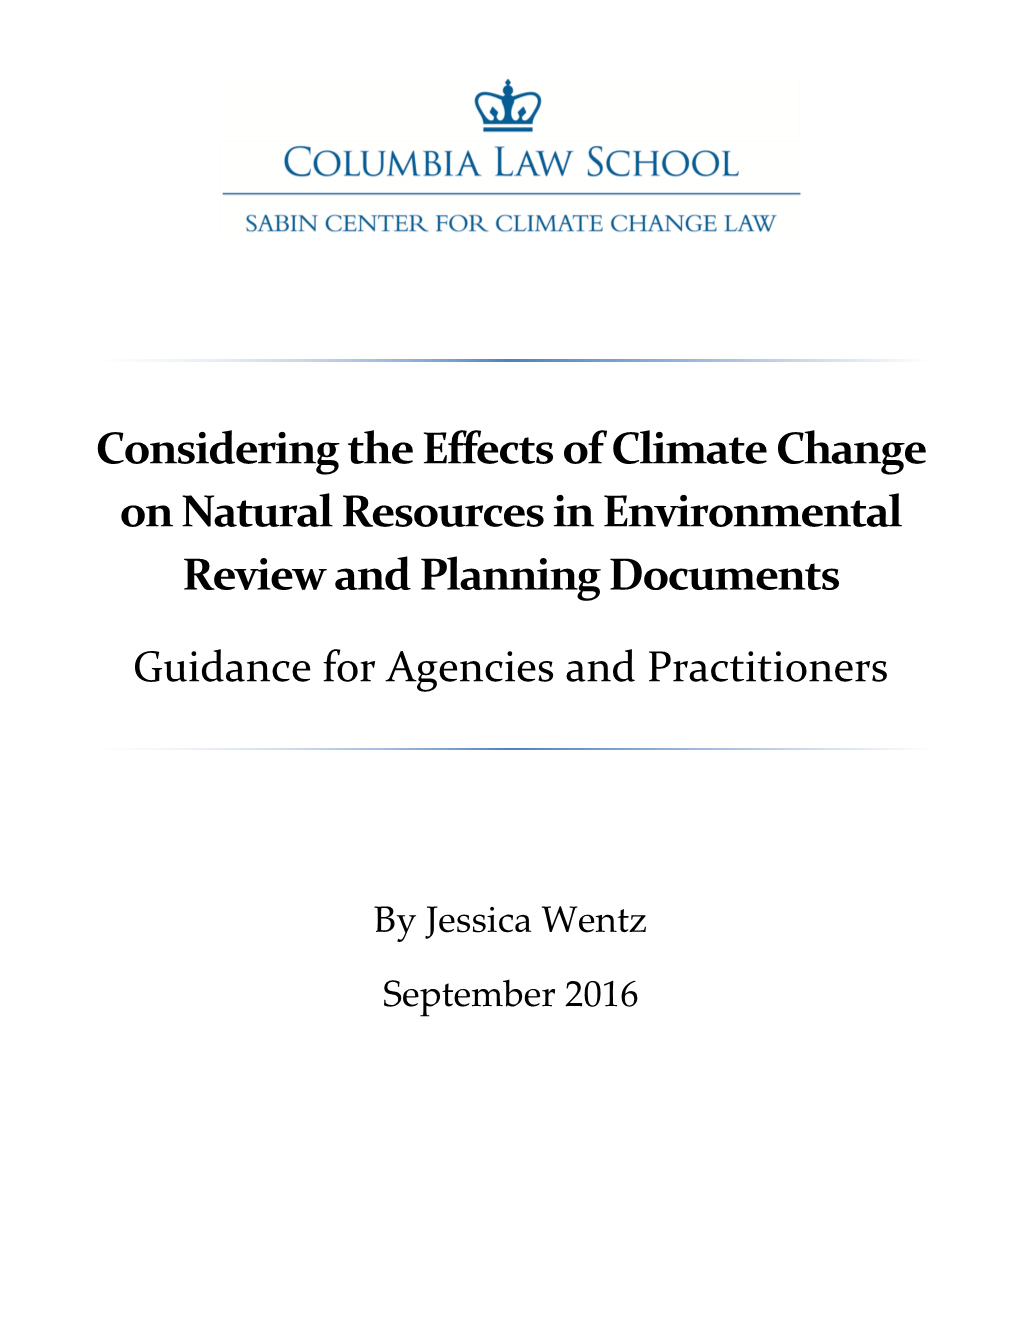 Considering the Effects of Climate Change on Natural Resources in Environmental Review and Planning Documents